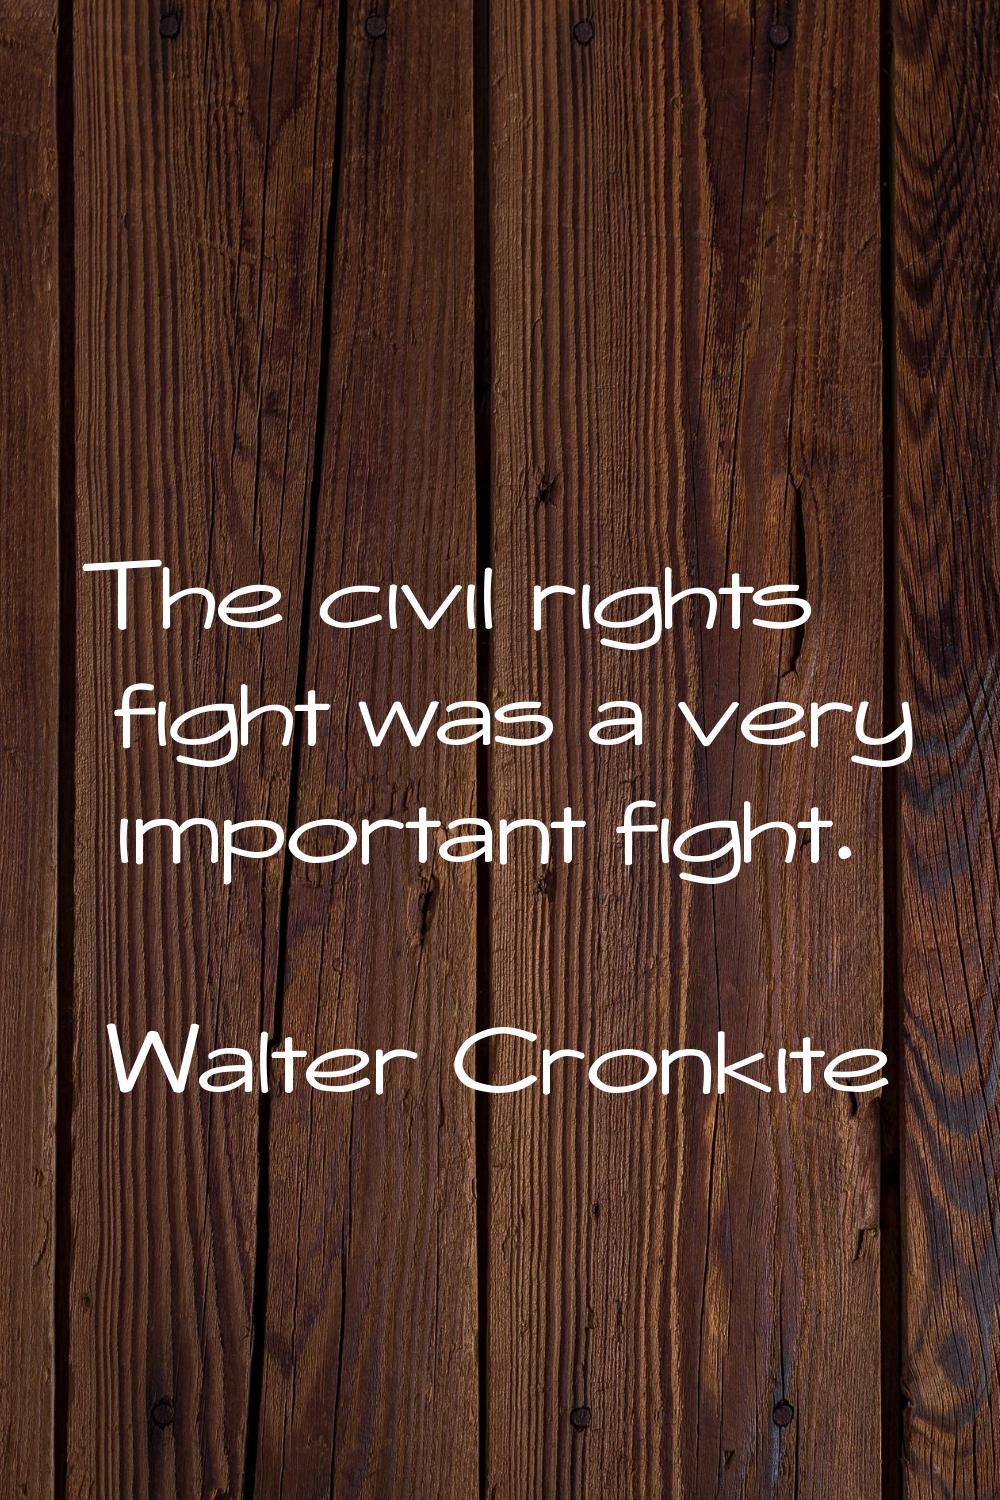 The civil rights fight was a very important fight.